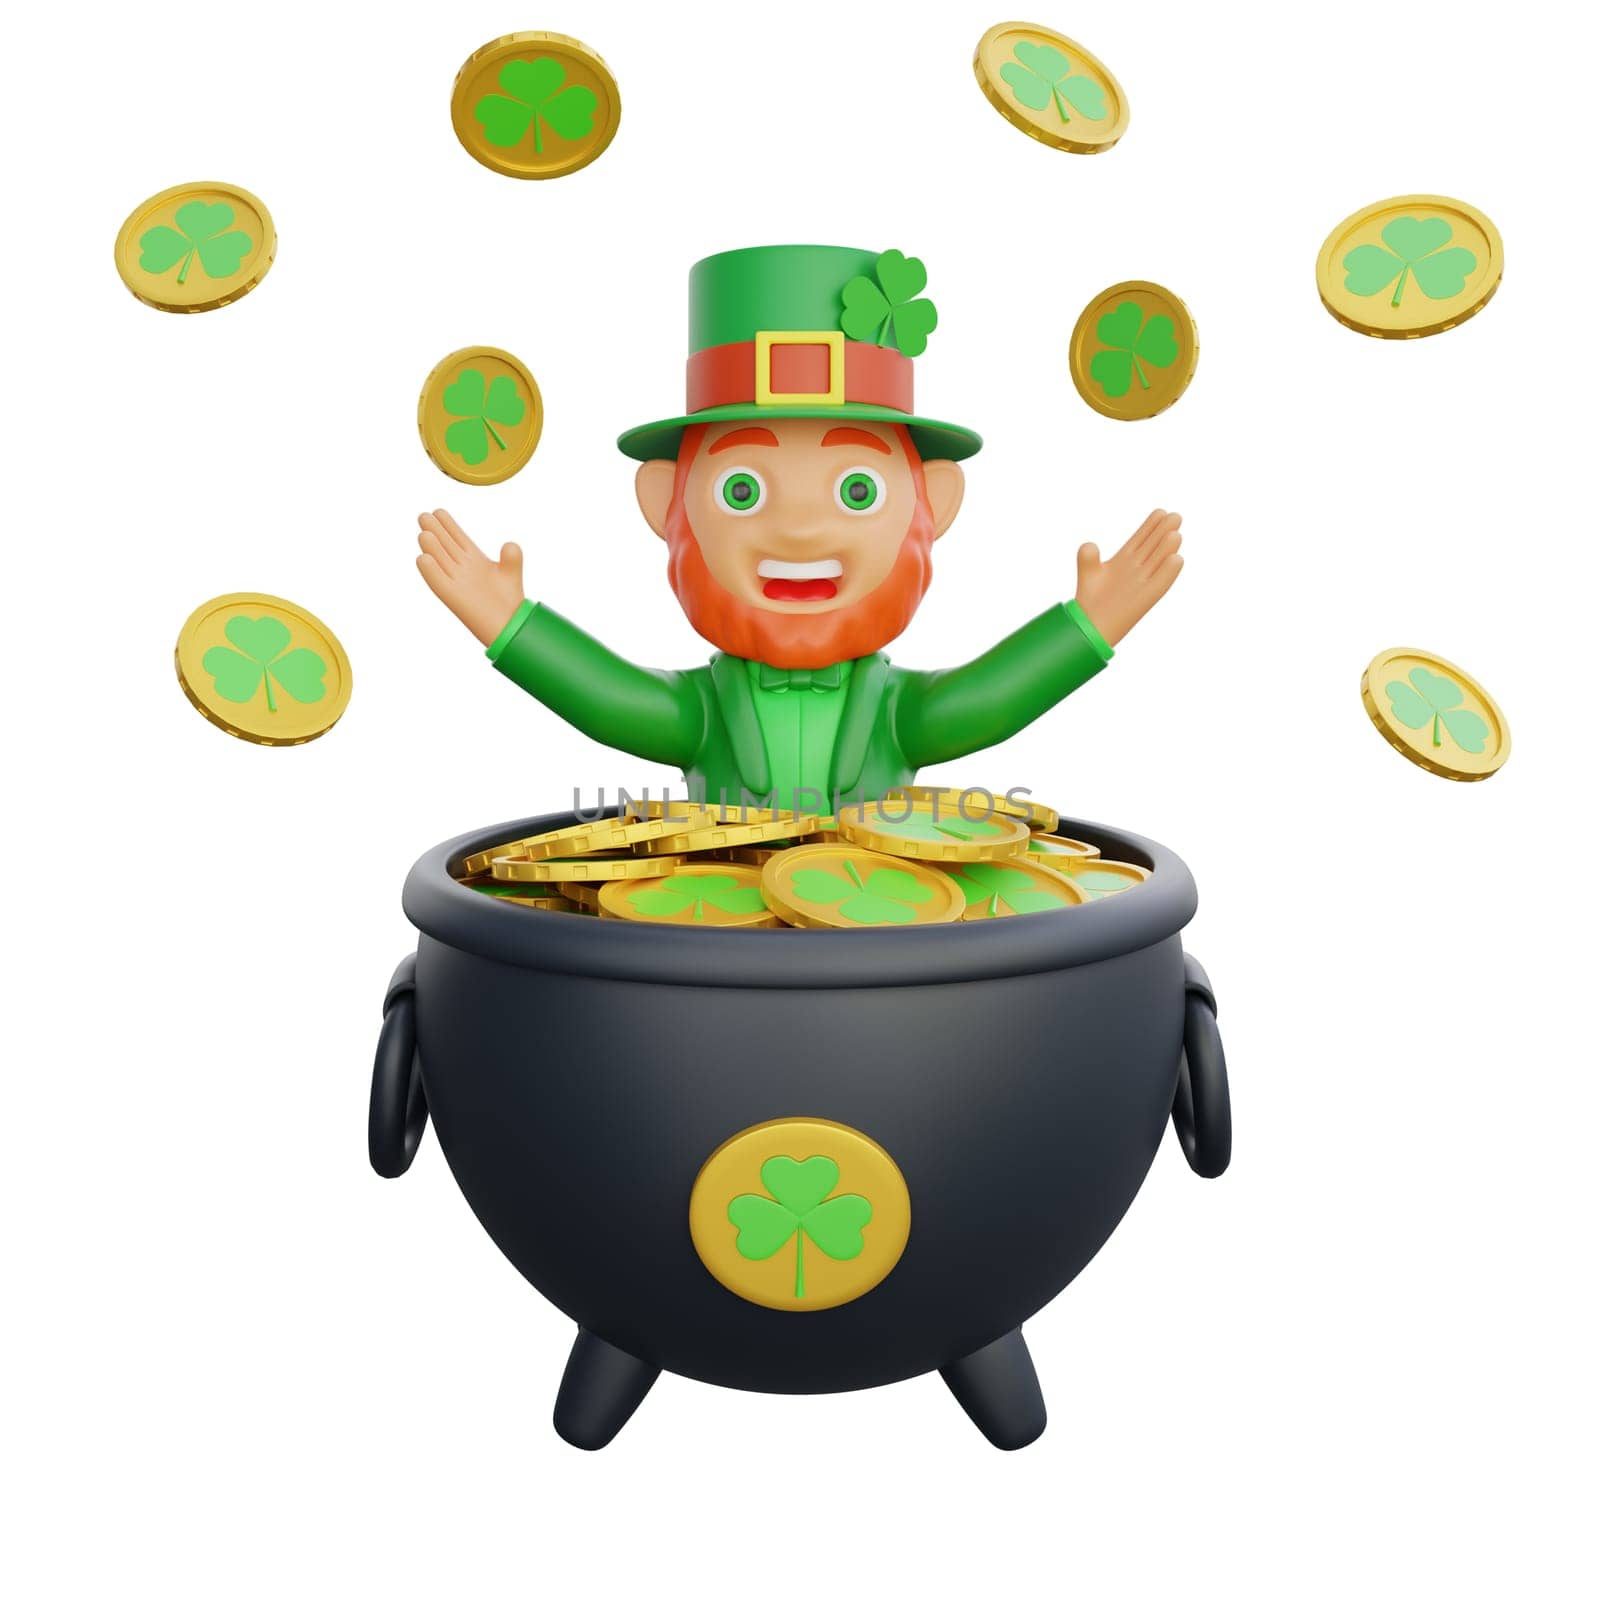 3D illustration of a joyful leprechaun inside a cauldron surrounded by golden coins, perfect for St. Patrick's Day themed projects